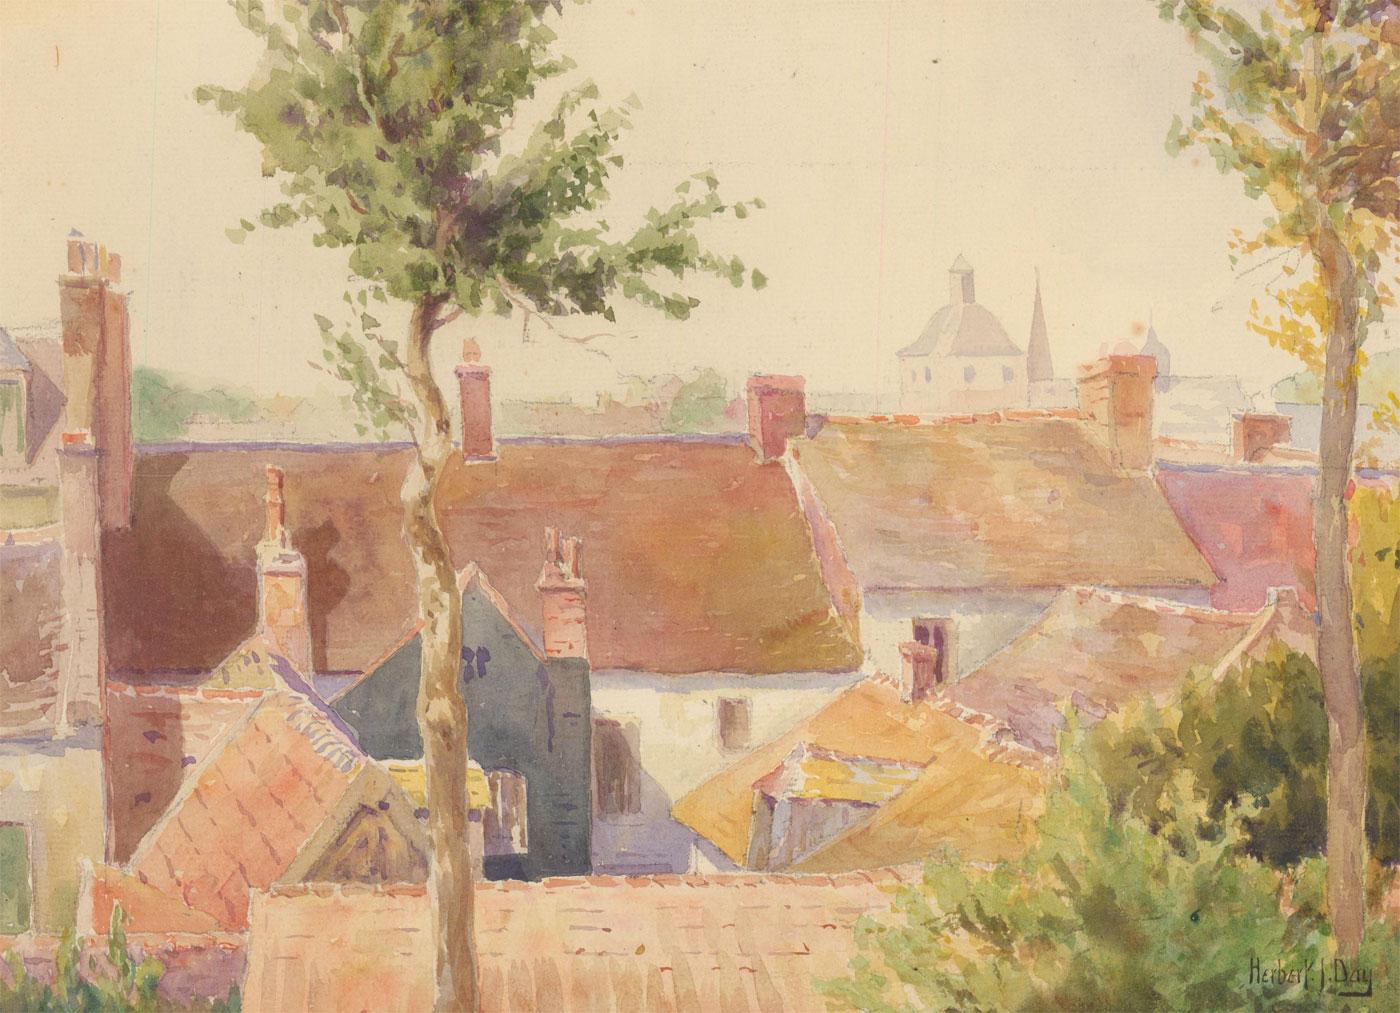 A watercolour study of rooftops with a city skyline in the distance, possibly of Illinois, where the American Herbert J. Day (1875-1950) lived. Signed. On board.
